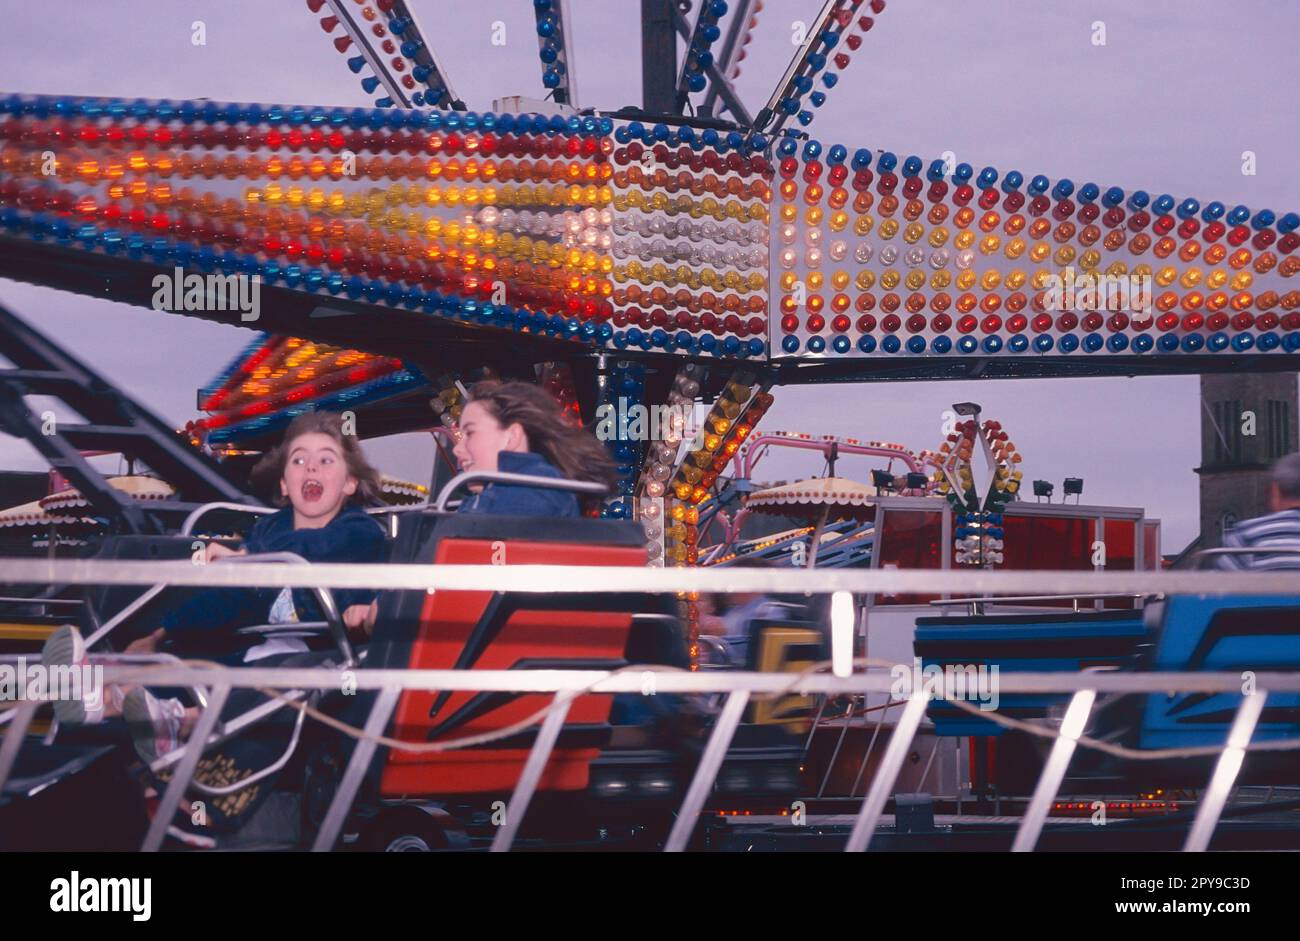 Funfair on Helensburgh seafront, Scotland with children on twister. Stock Photo